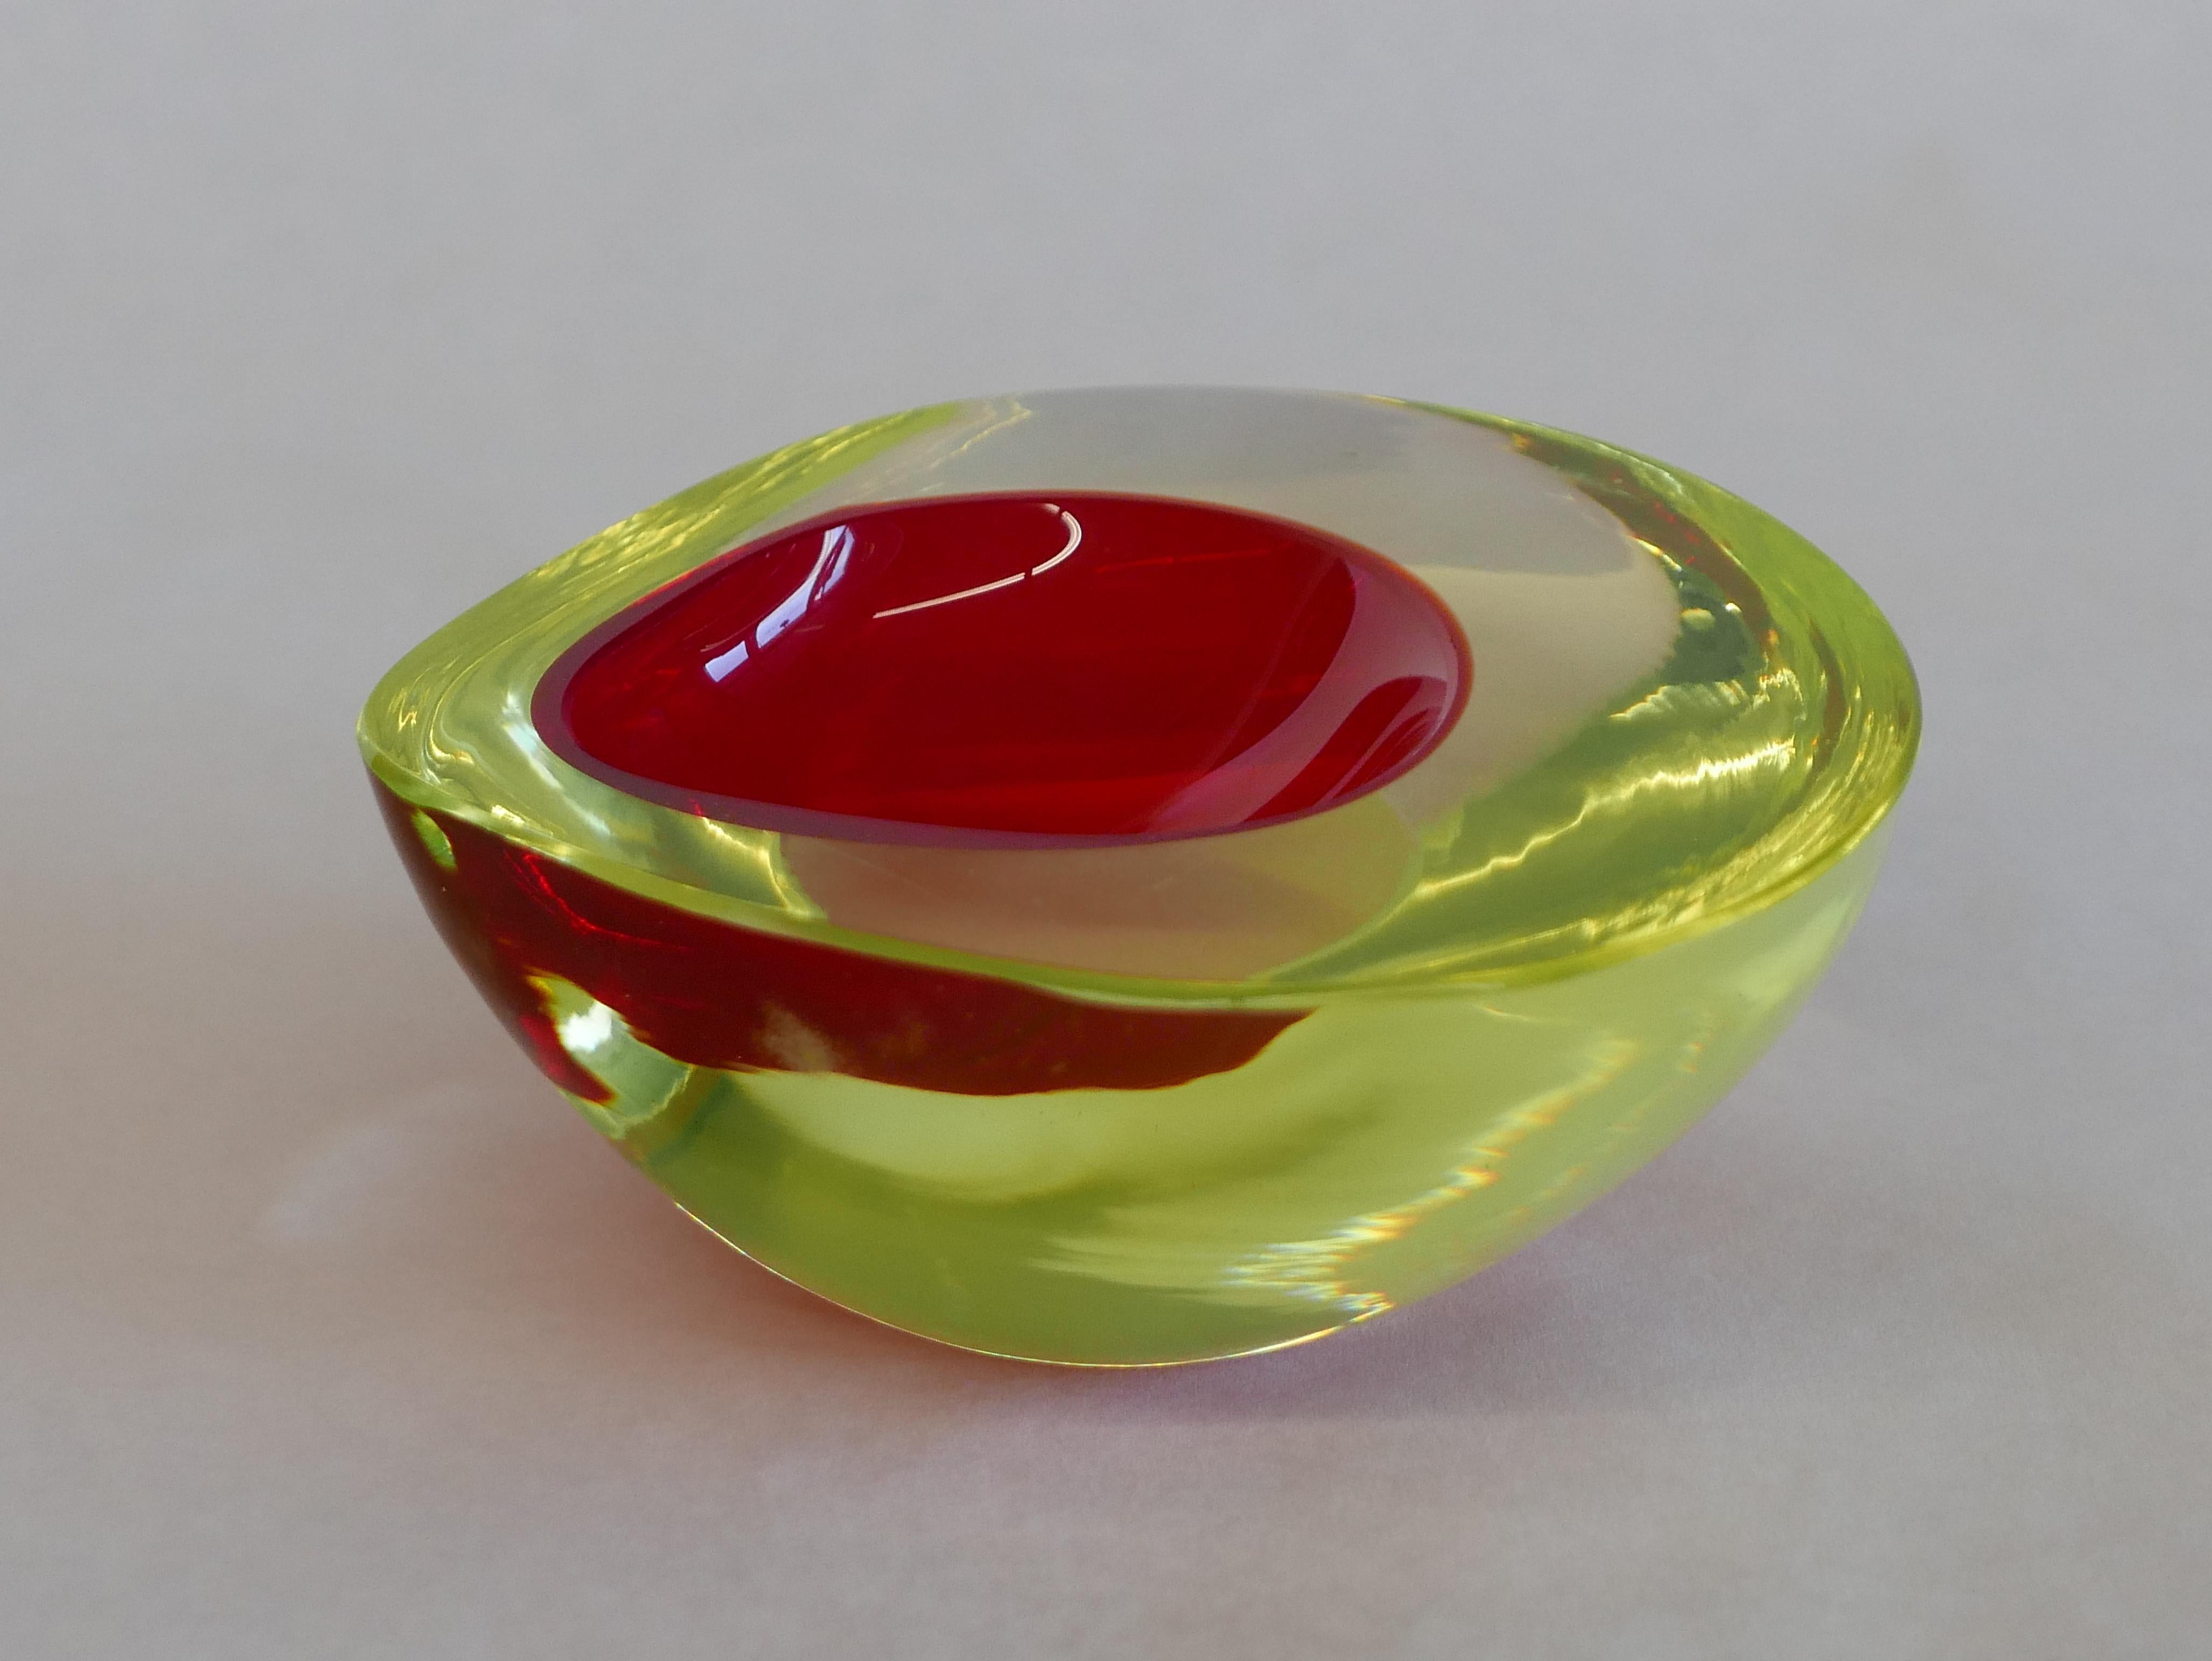 Antonio da Ros created this design in 1960 for Cenedese doing various piece with uranium glass which almost glows by itself. Made of hand blown glass in the “Sommerso”-technique by Vetreria Gino Cenedese, Murano-Italy. In excellent condition, with